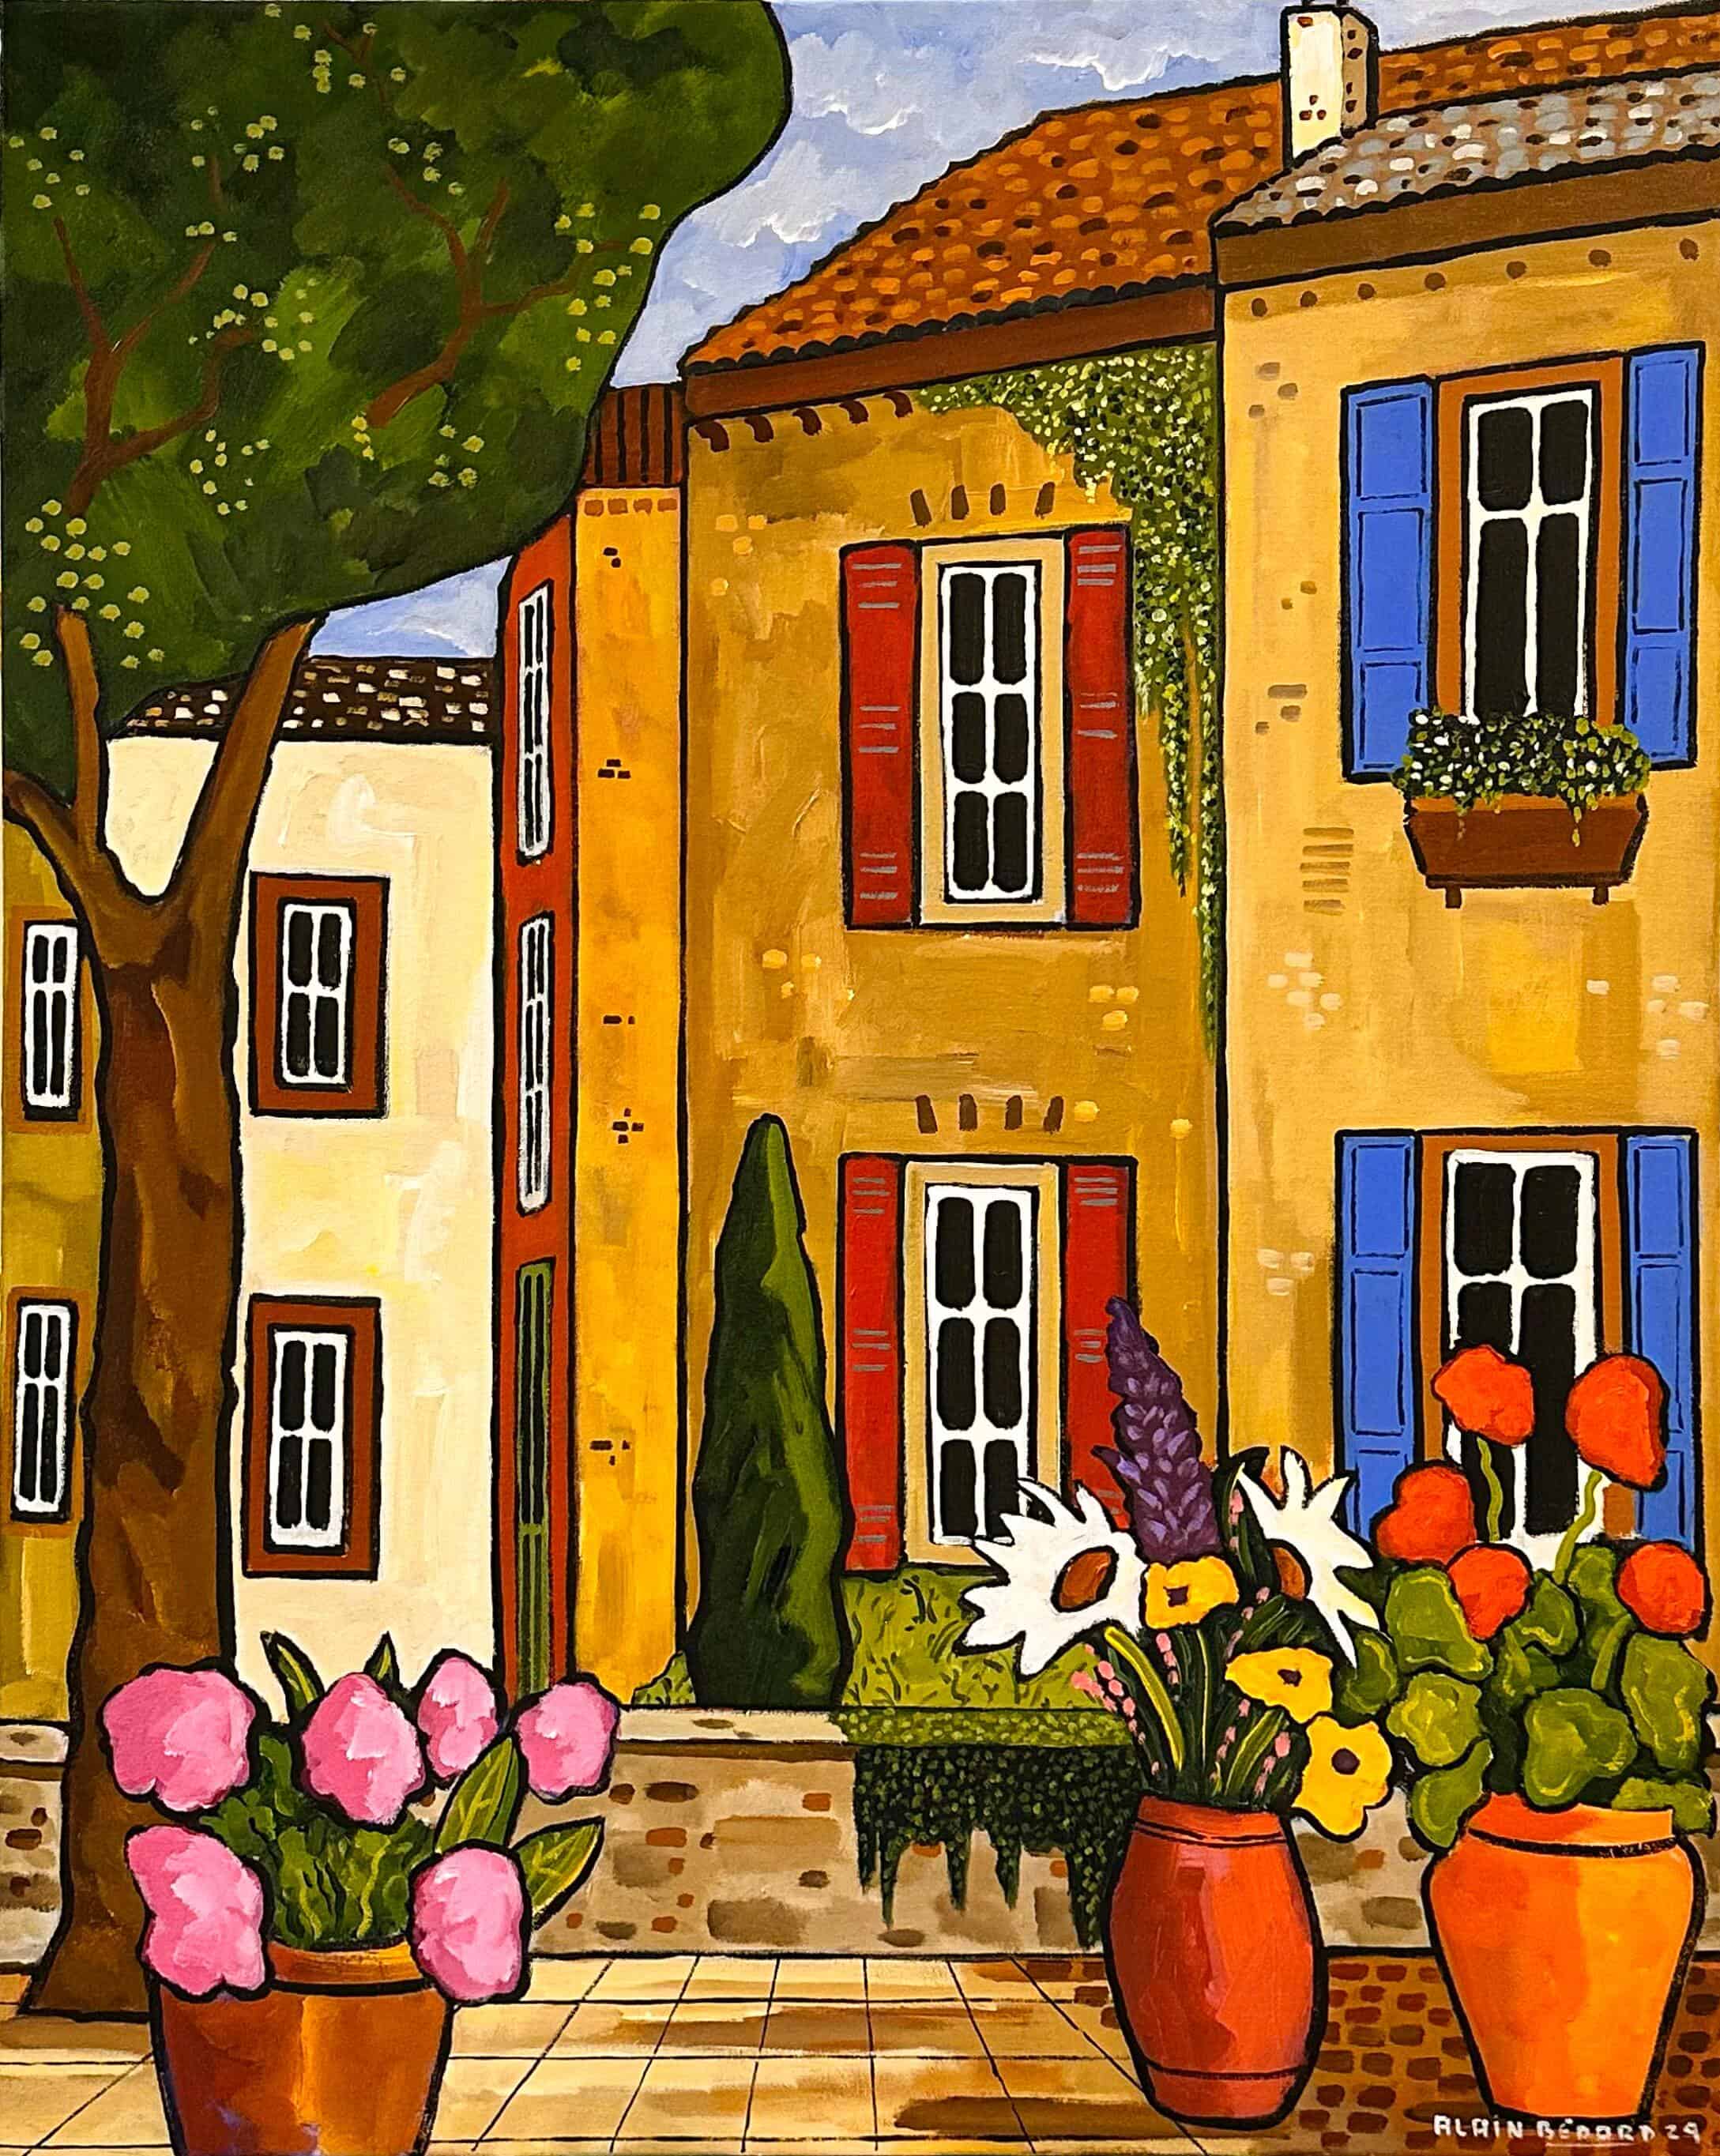 Contemporary Art. Title: Douceur, Acrylic on Canvas, 30 x 24 in by Canadian Artist Alain Bédard.